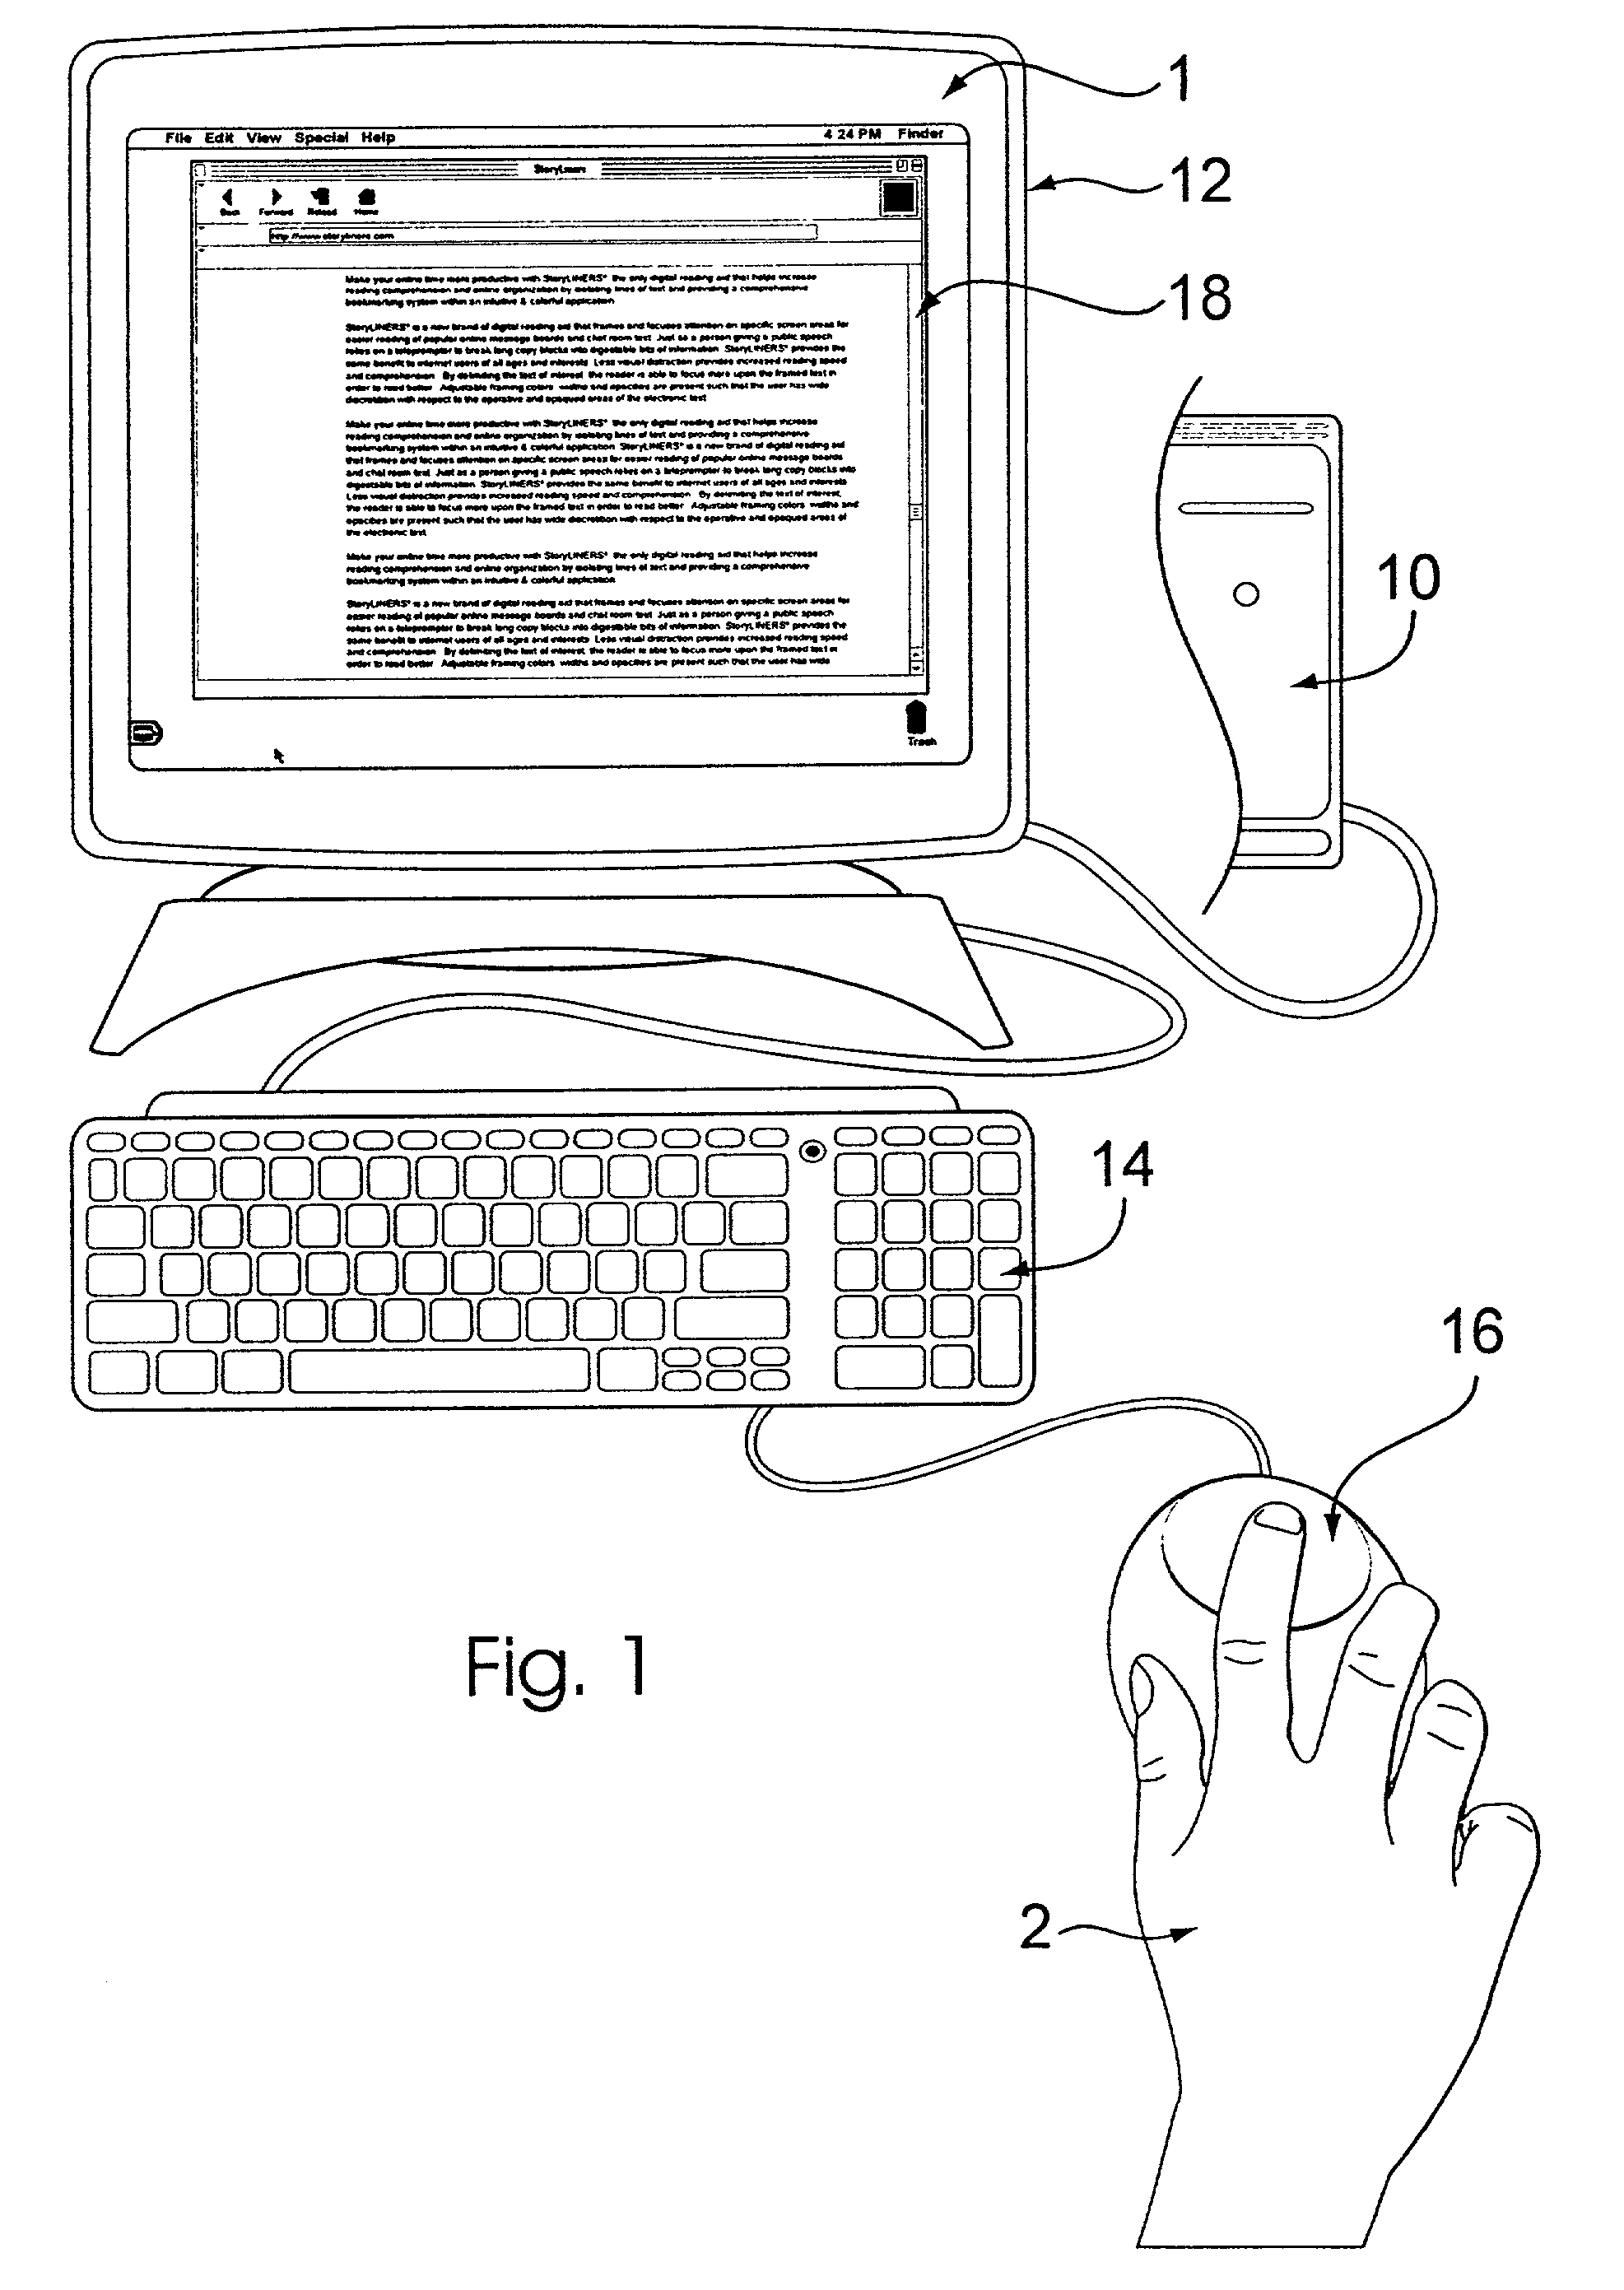 Reading aid for electronic text and displays